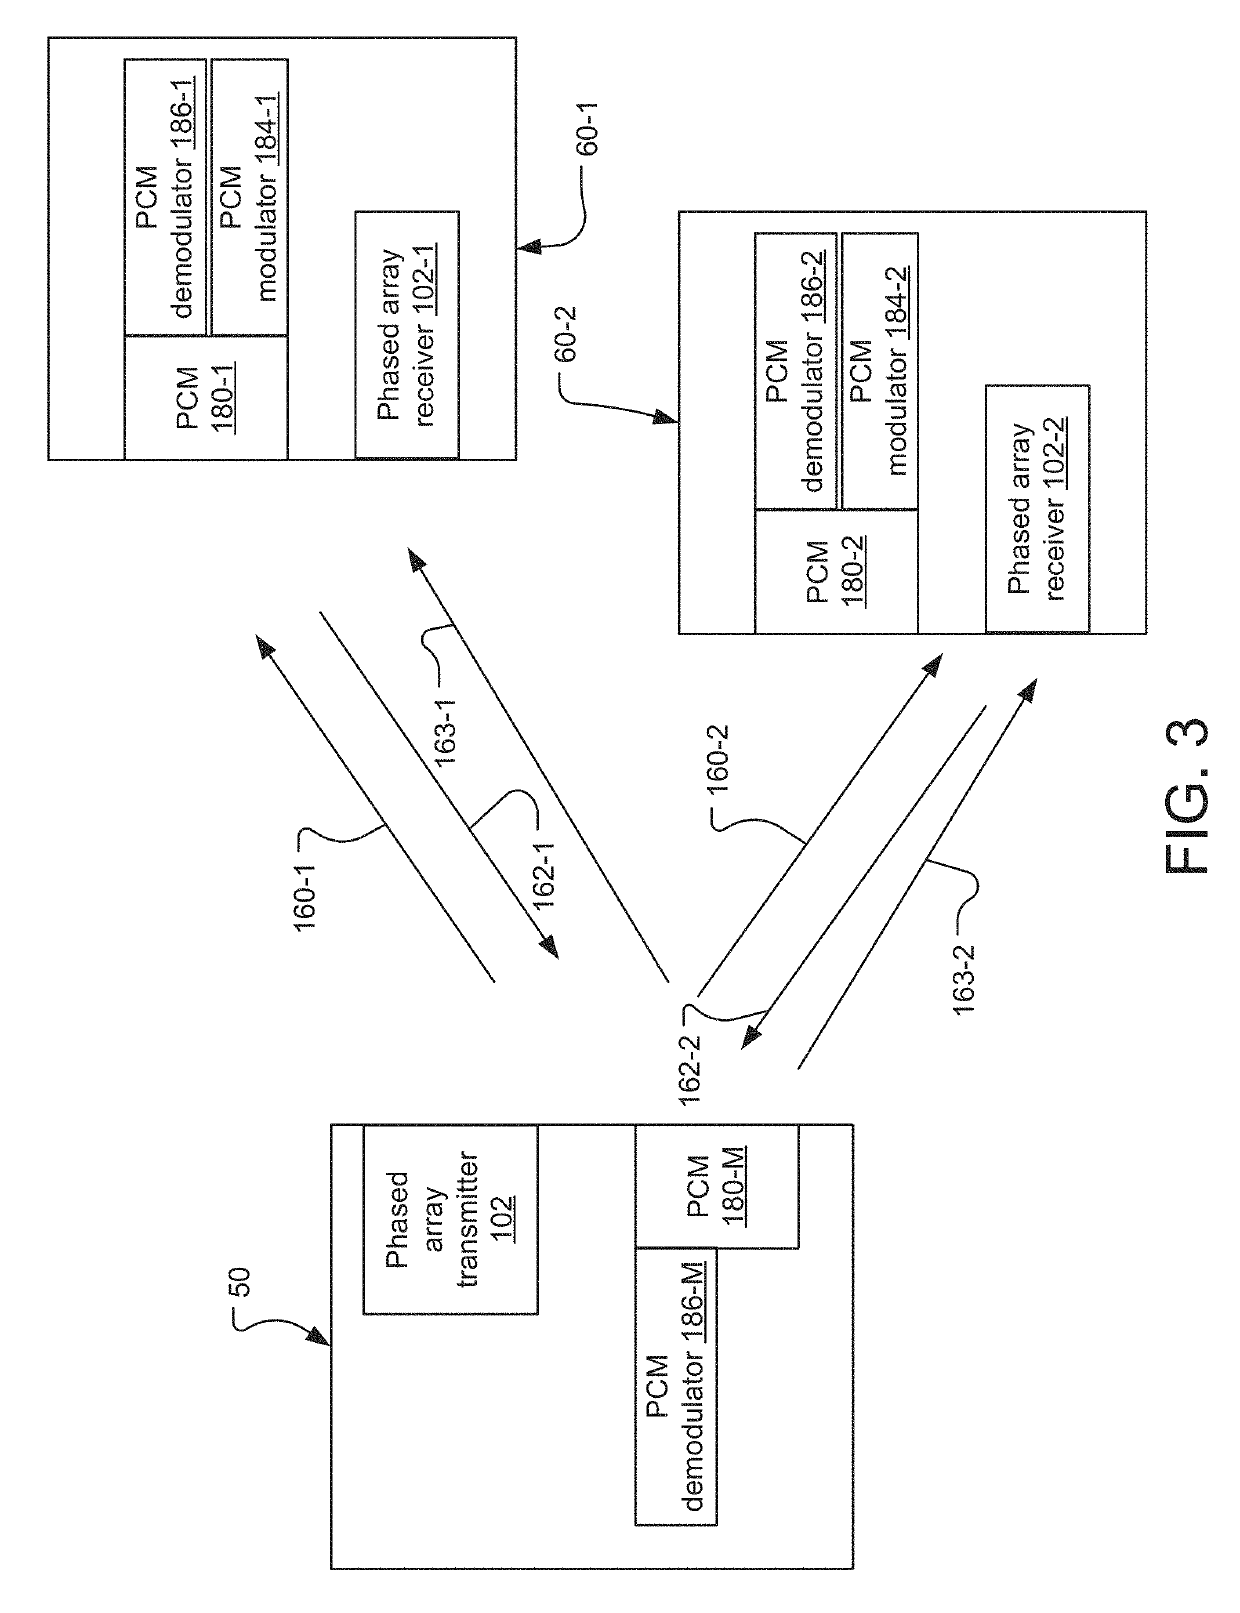 Optical communications system phase-controlled transmitter and phase-conjugate mirror receiver